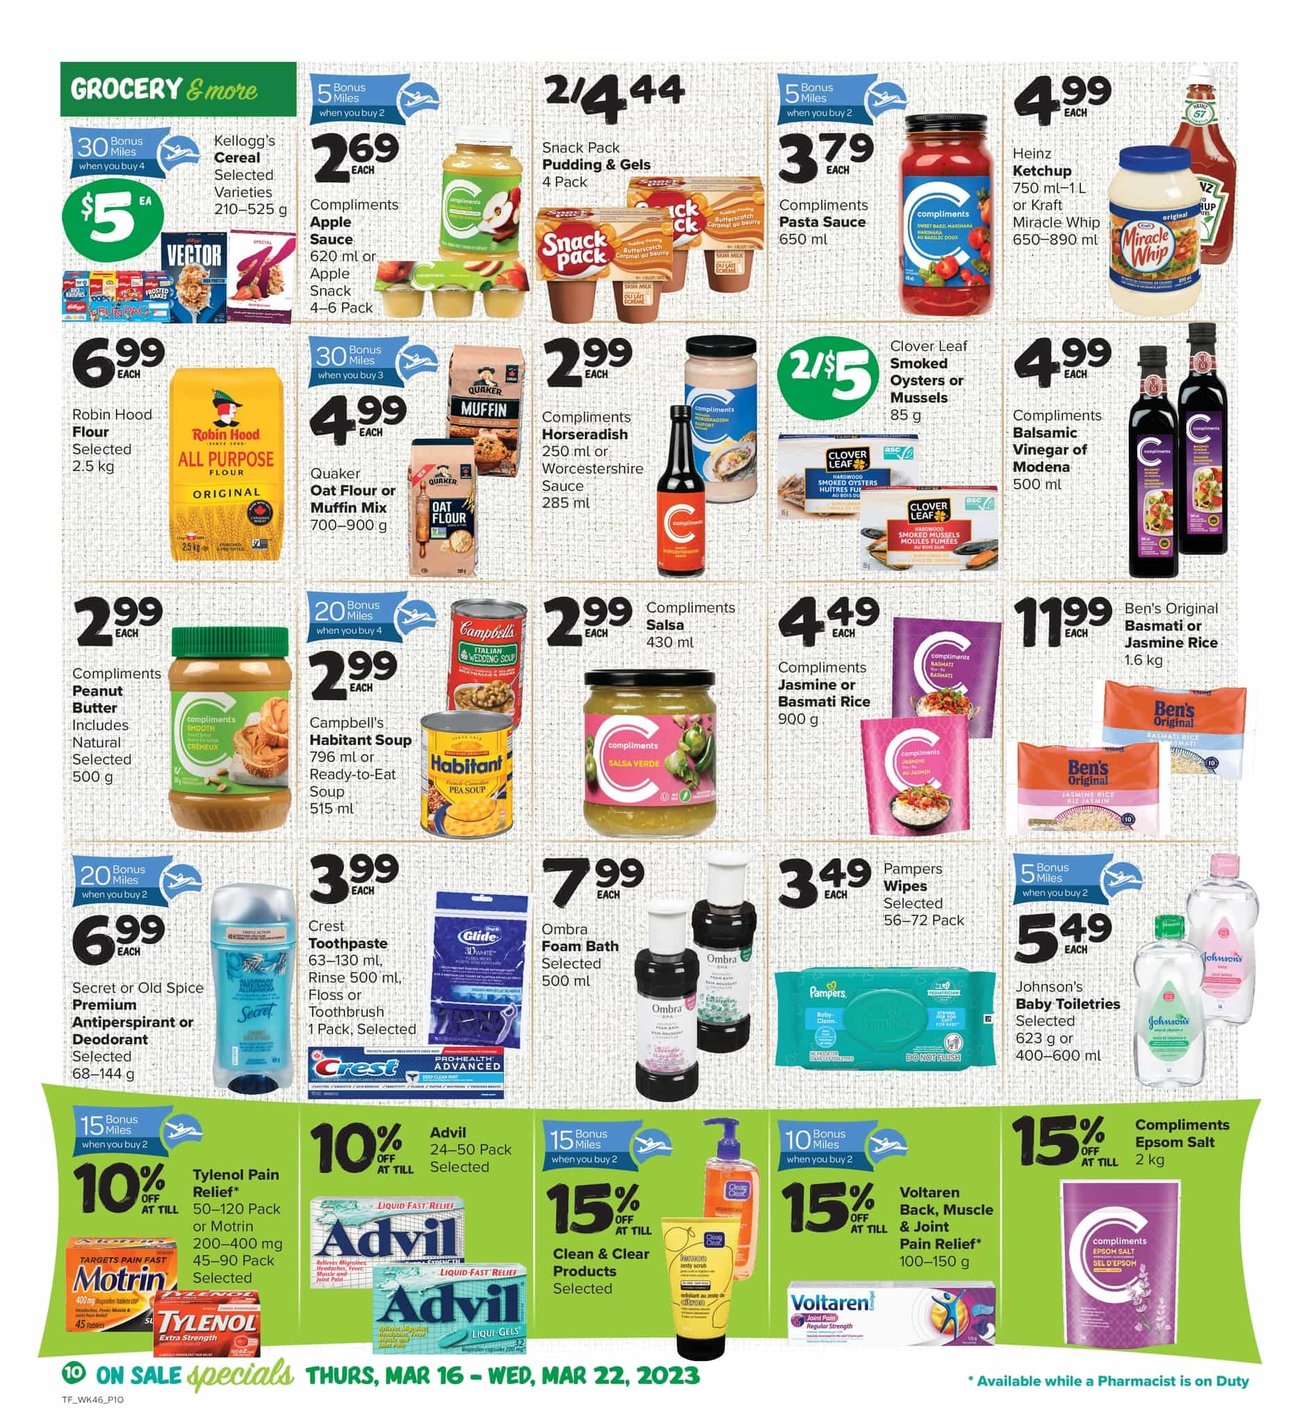 Thrifty Foods - Weekly Flyer Specials - Page 10